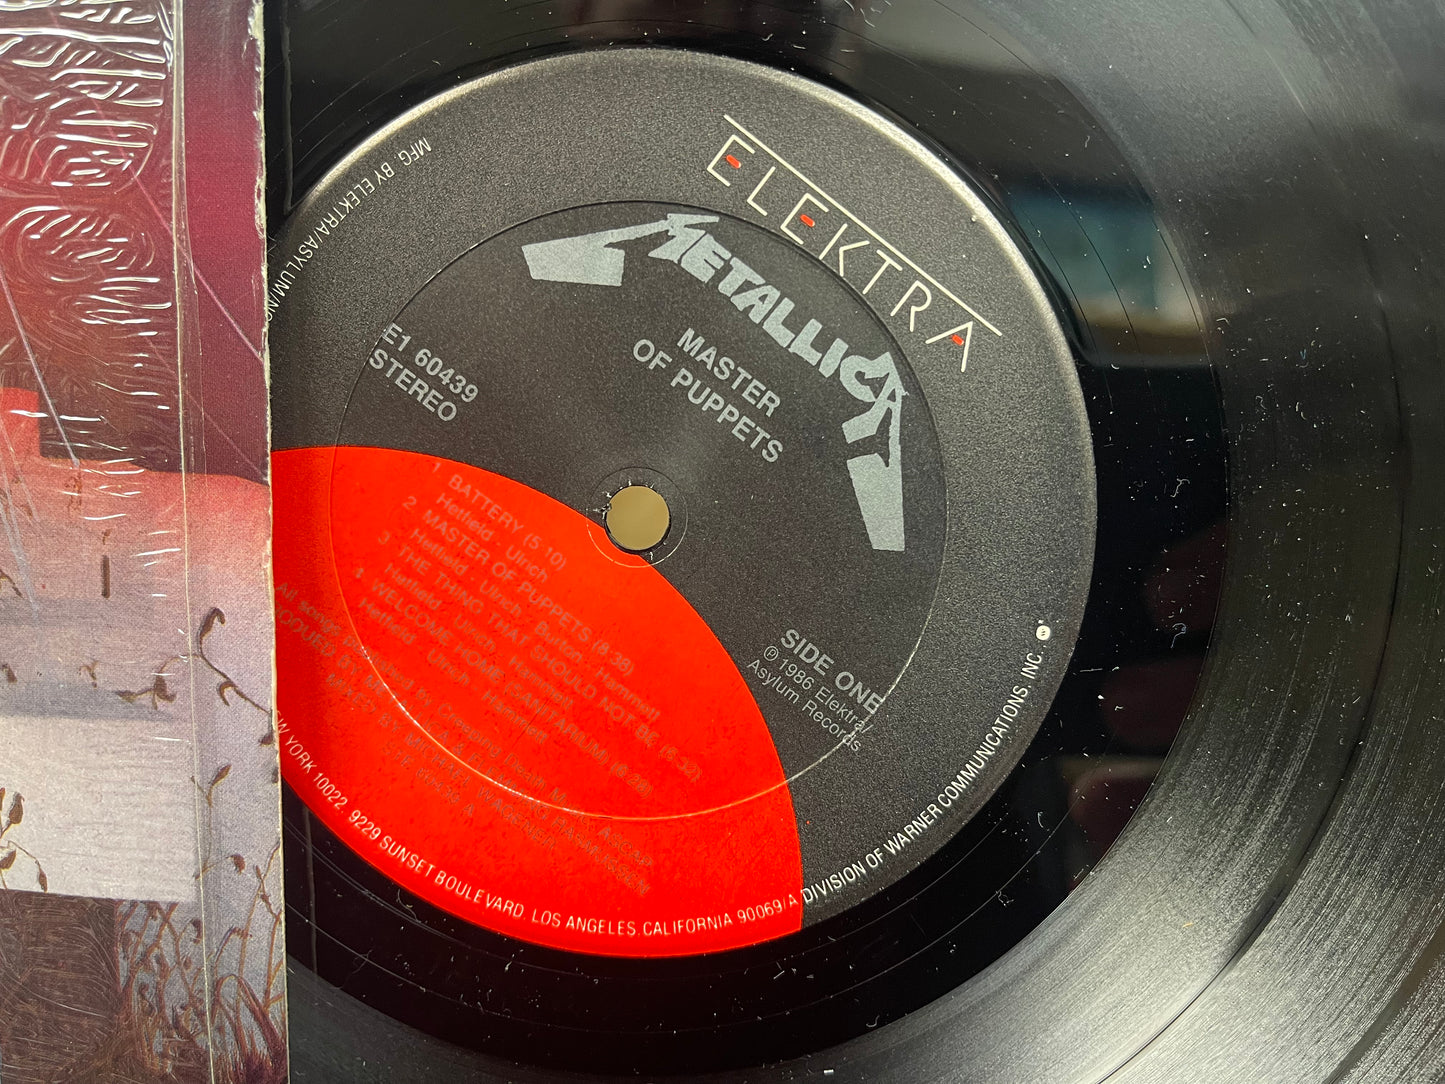 Metallica - Master of Puppets (1st Club Pressing 1986)